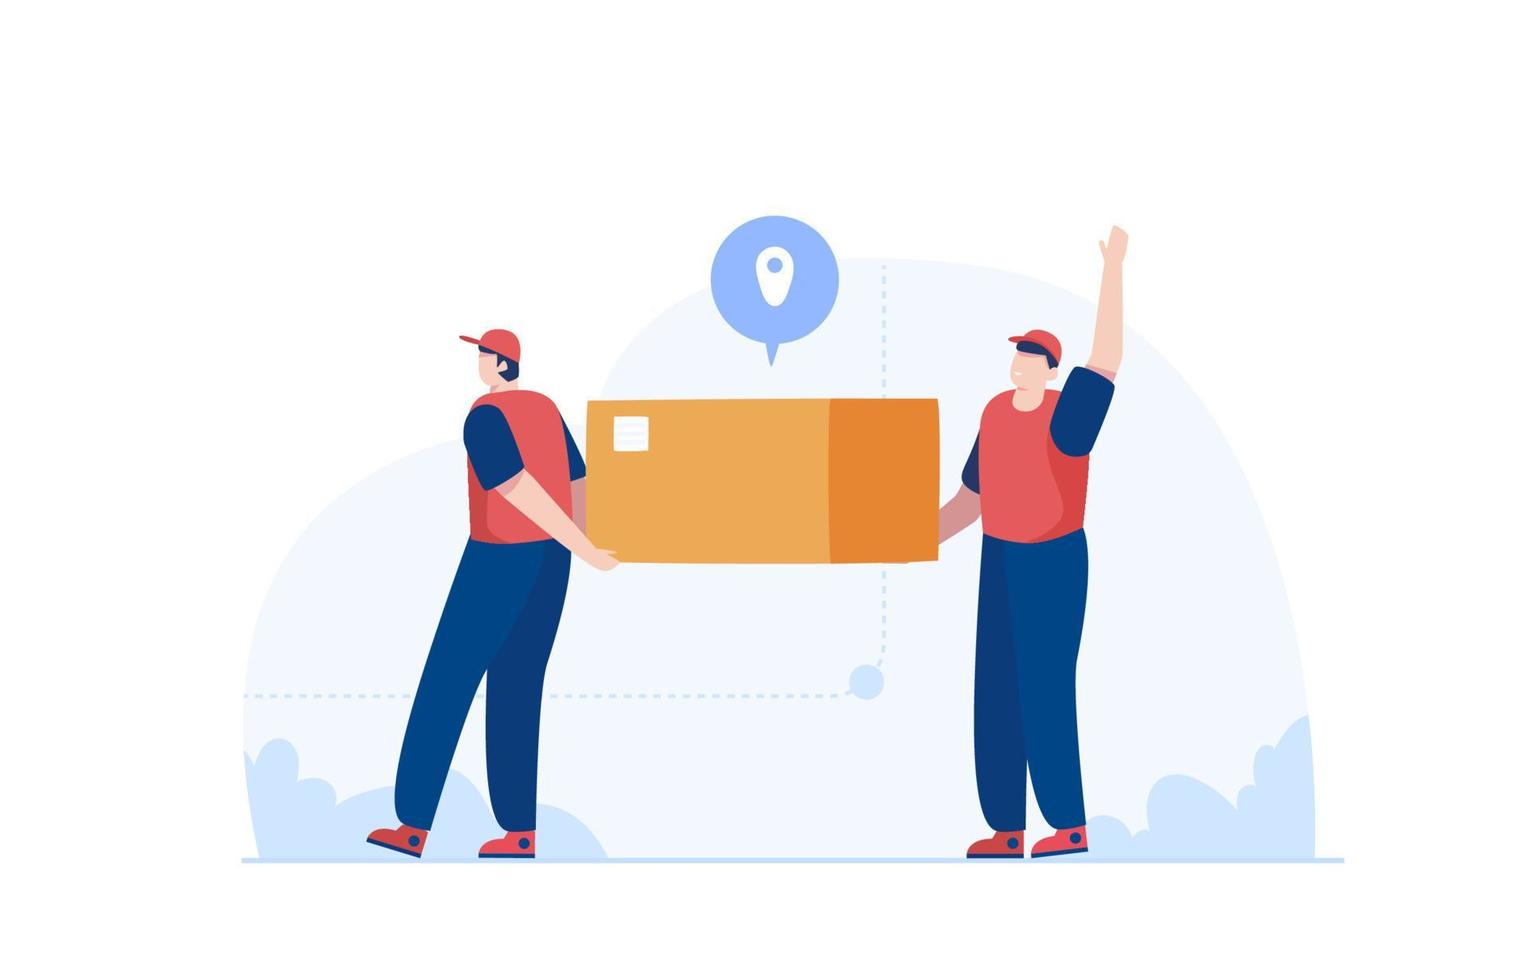 Delivery man workers carry a heavy box together. Employee arranging boxes. Vector illustration